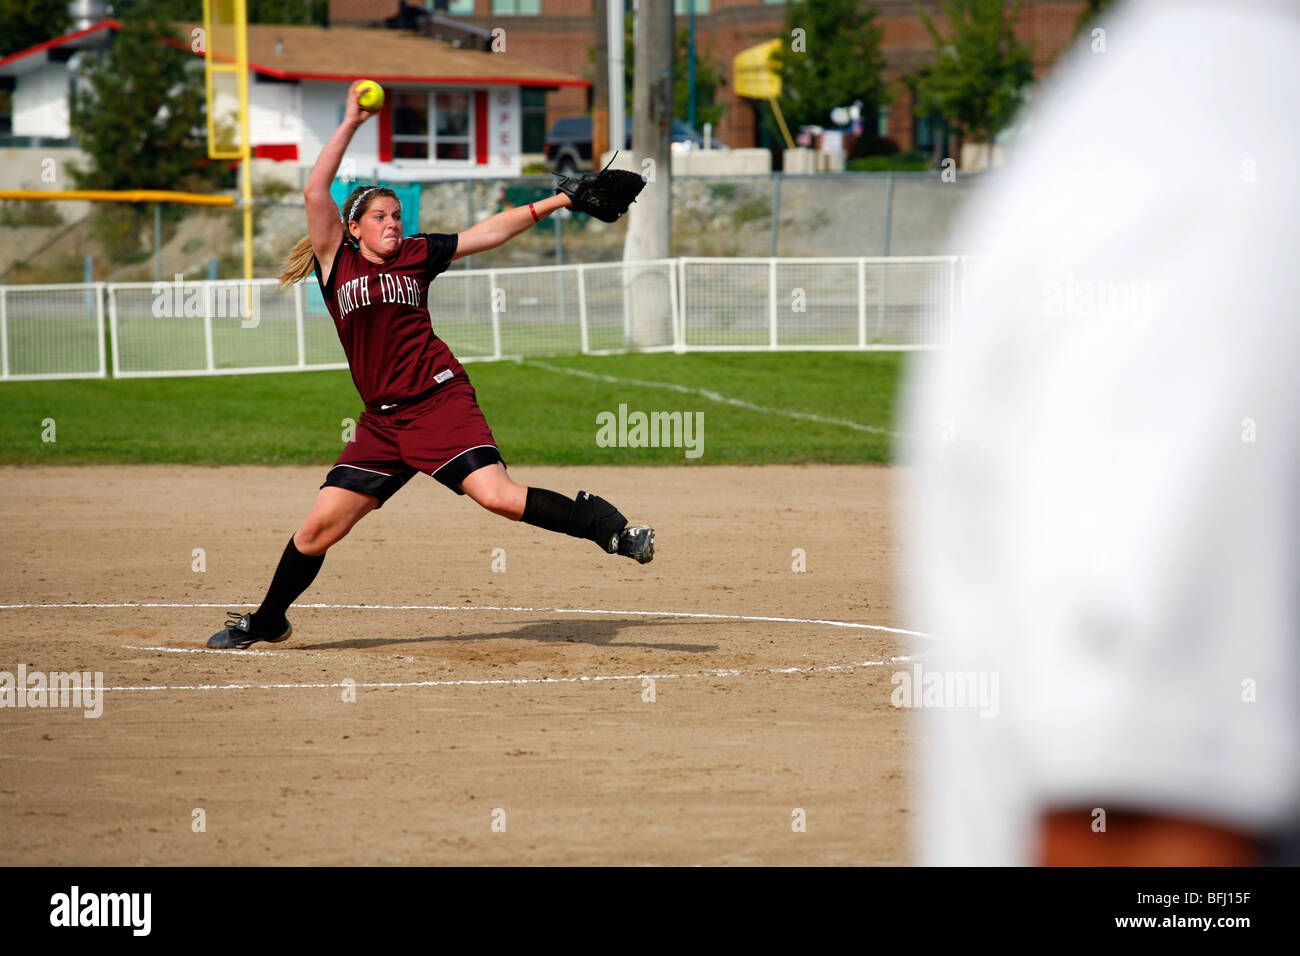 North Idaho College softball game, Sept. 28, 2008, Coeur D Alene, Idaho. Pitcher at the end of the wind-up. Stock Photo